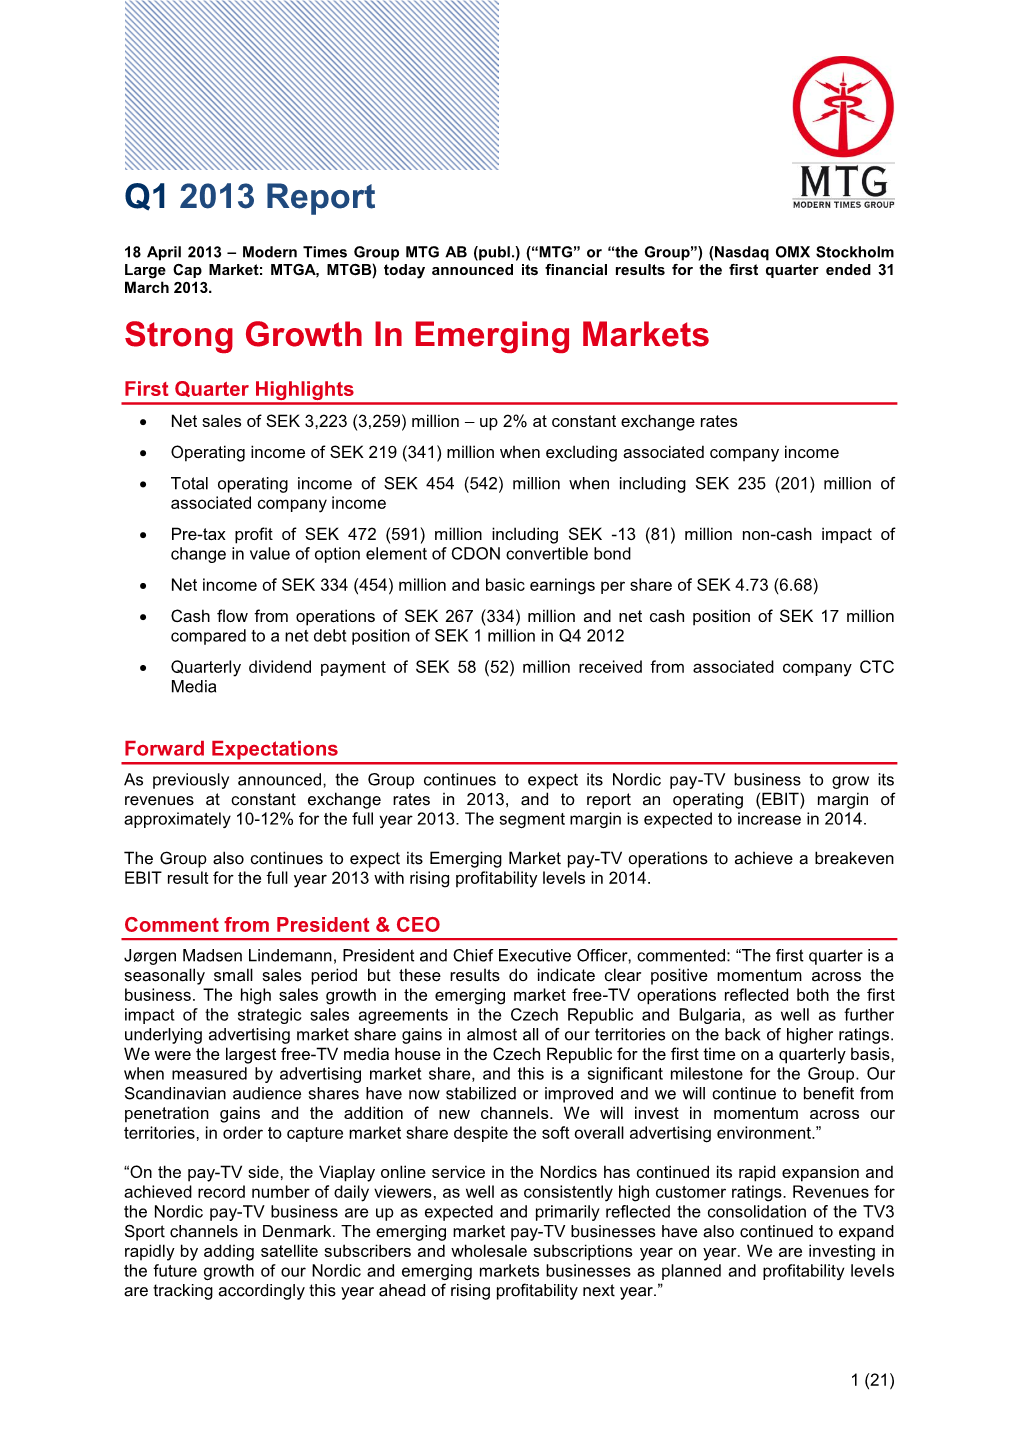 Q1 2013 Report Strong Growth in Emerging Markets